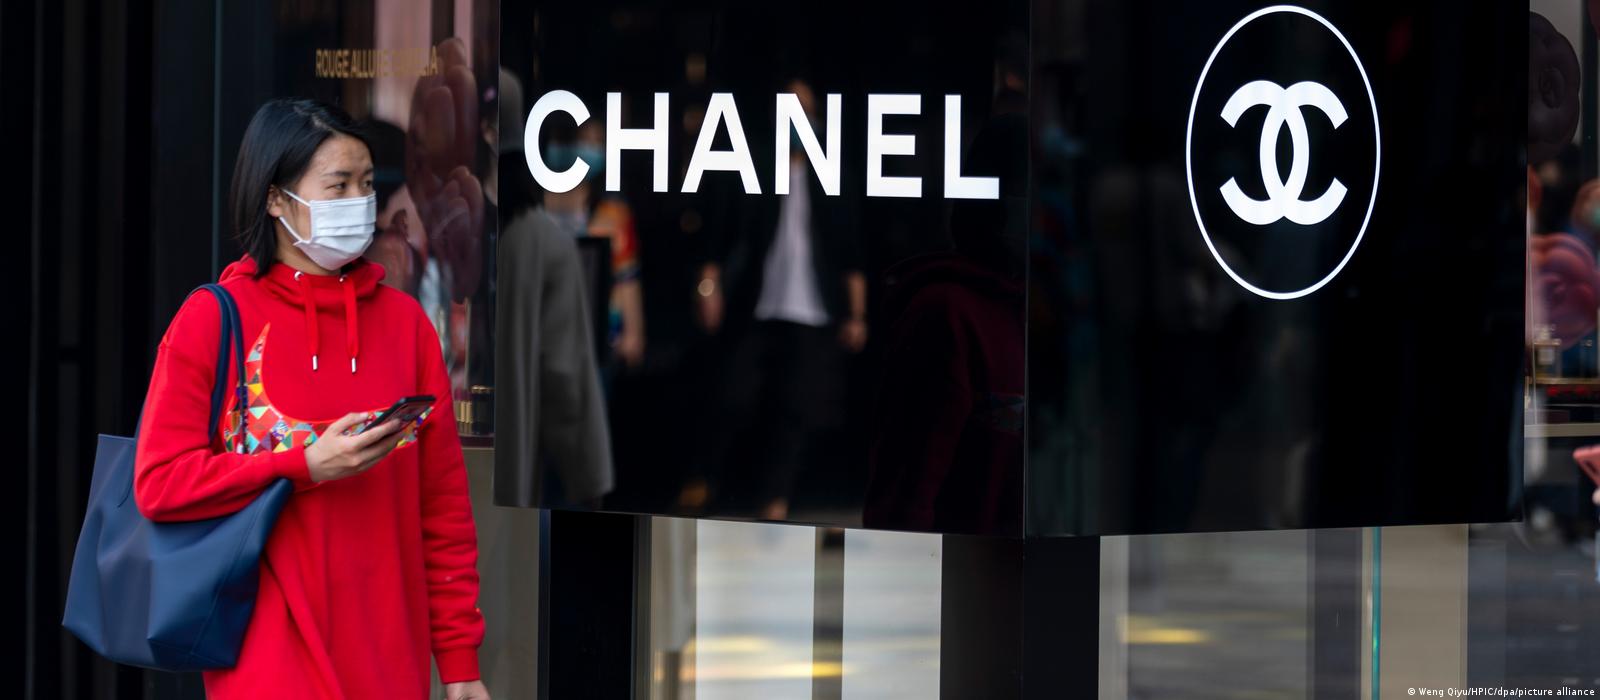 Chanel attacks Huawei (in vain), Blog